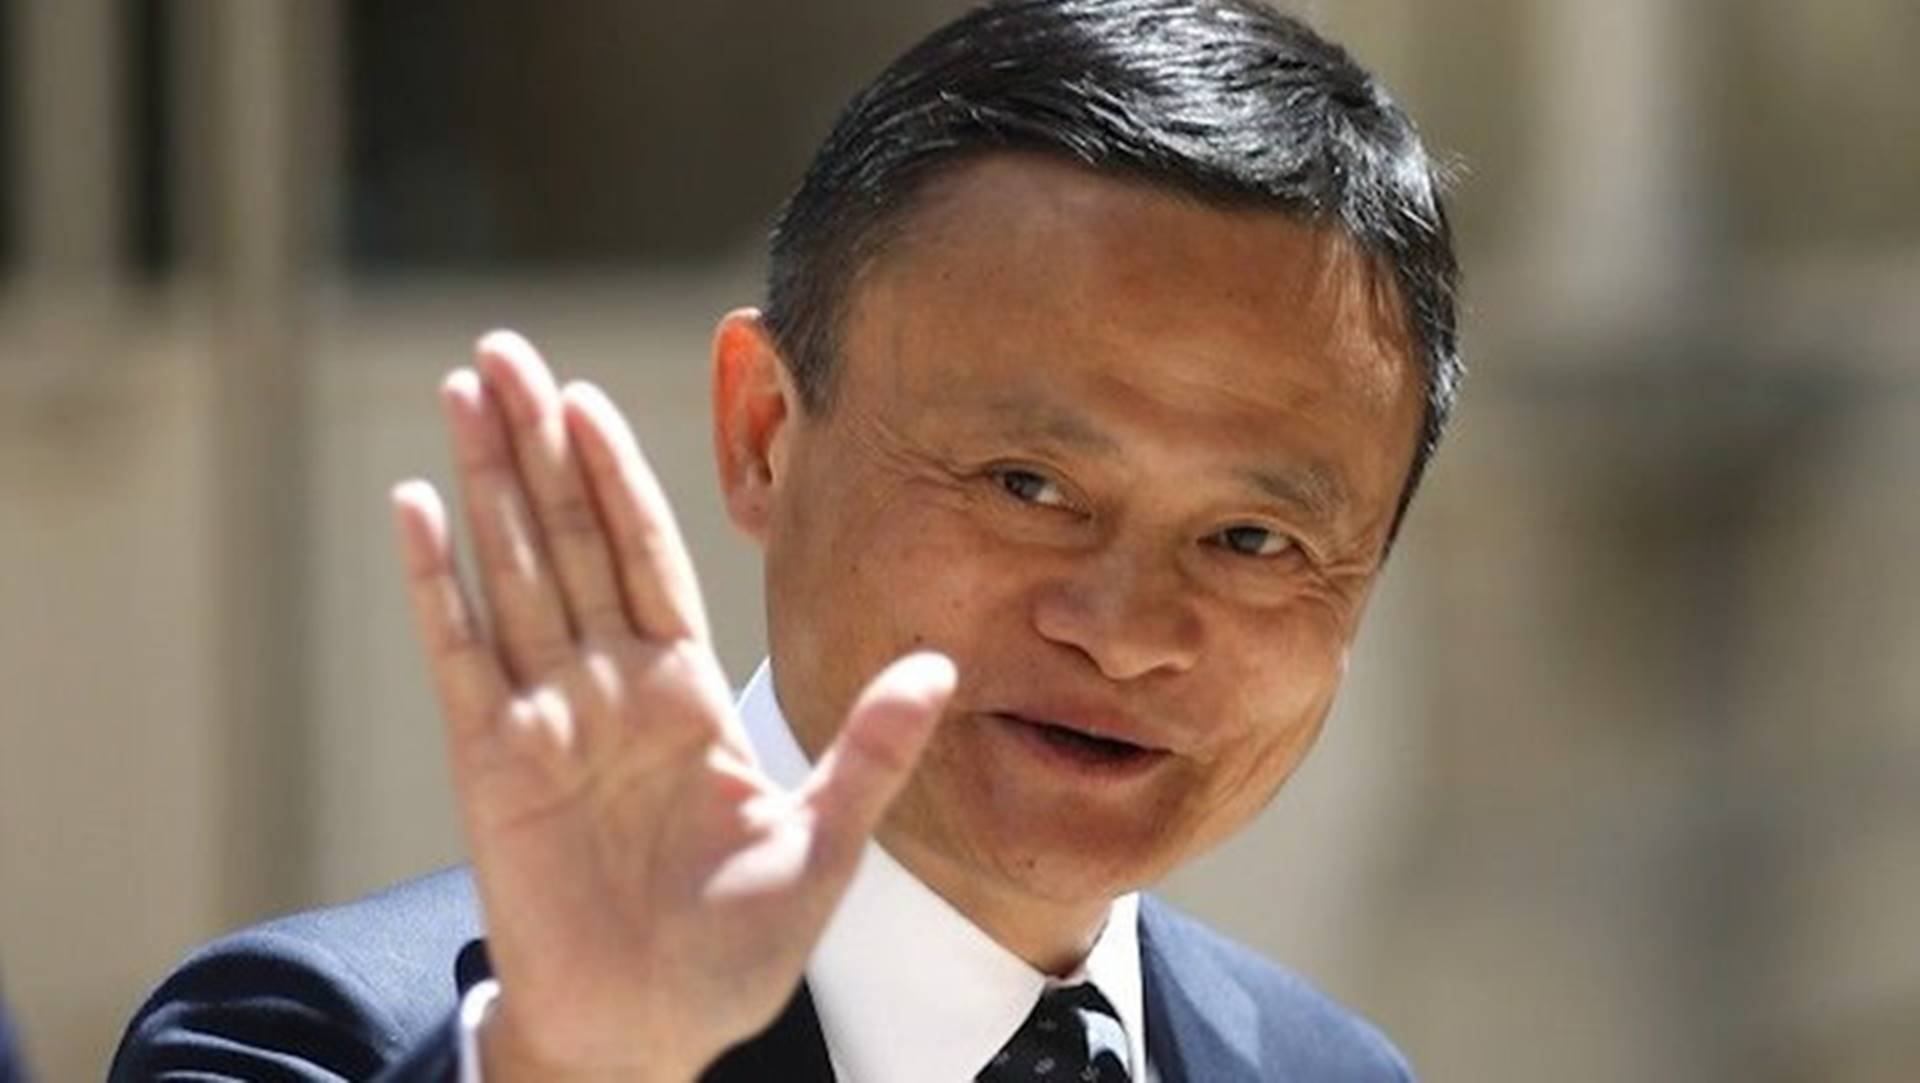 Alibaba shares surge nearly 7% after Jack Ma appears in Europe and company releases new chip